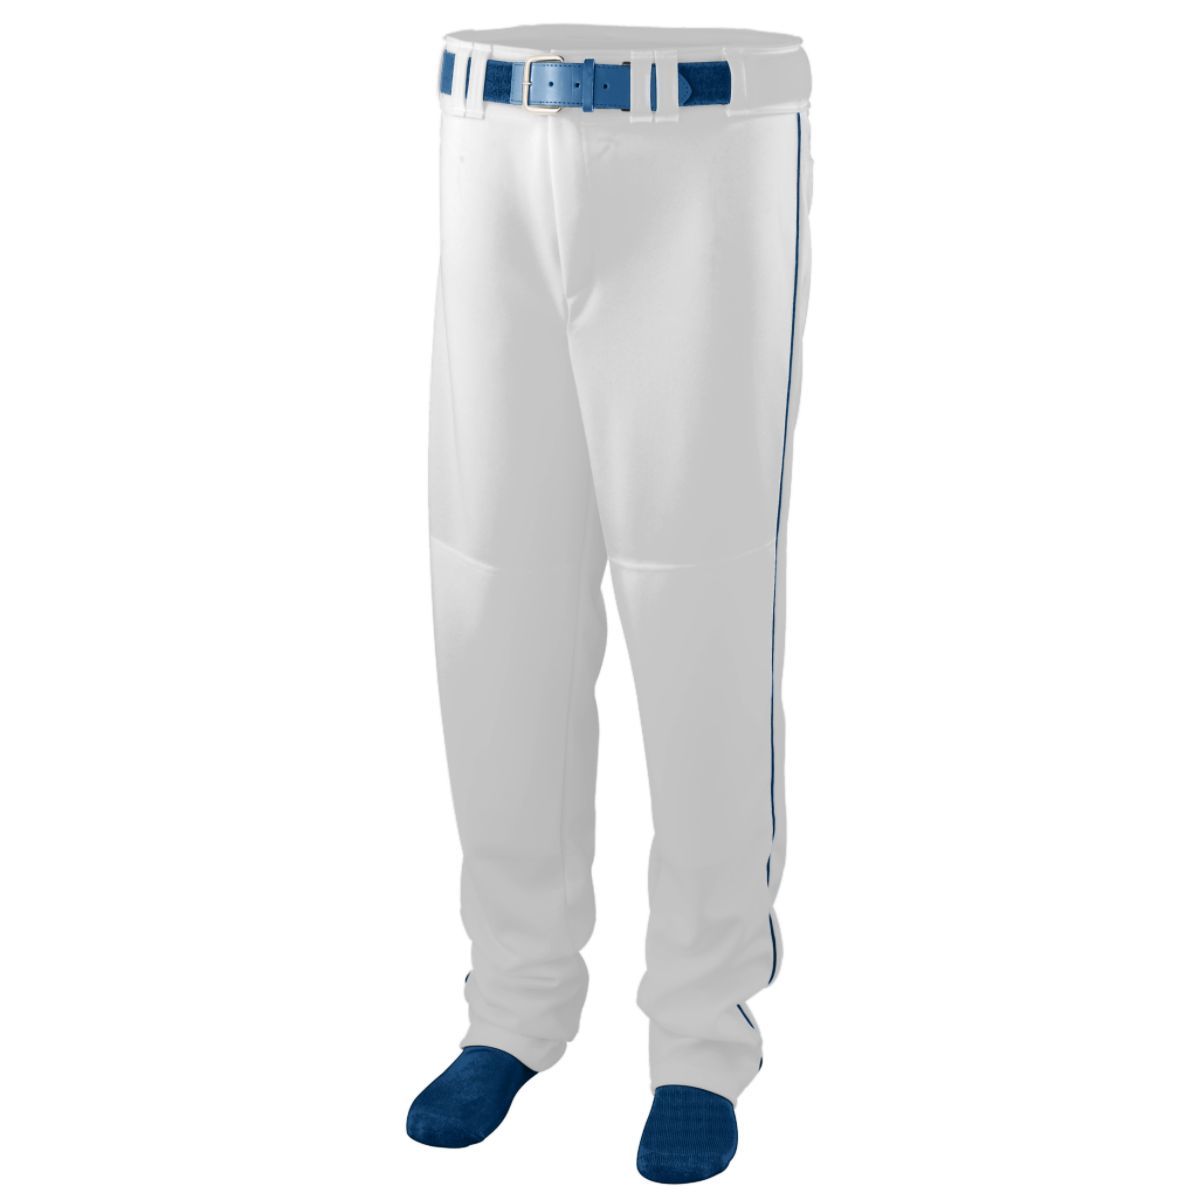 Augusta Sportswear Youth Series Baseball/Softball Pant With Piping in White/Navy  -Part of the Youth, Youth-Pants, Pants, Augusta-Products, Baseball, All-Sports, All-Sports-1 product lines at KanaleyCreations.com